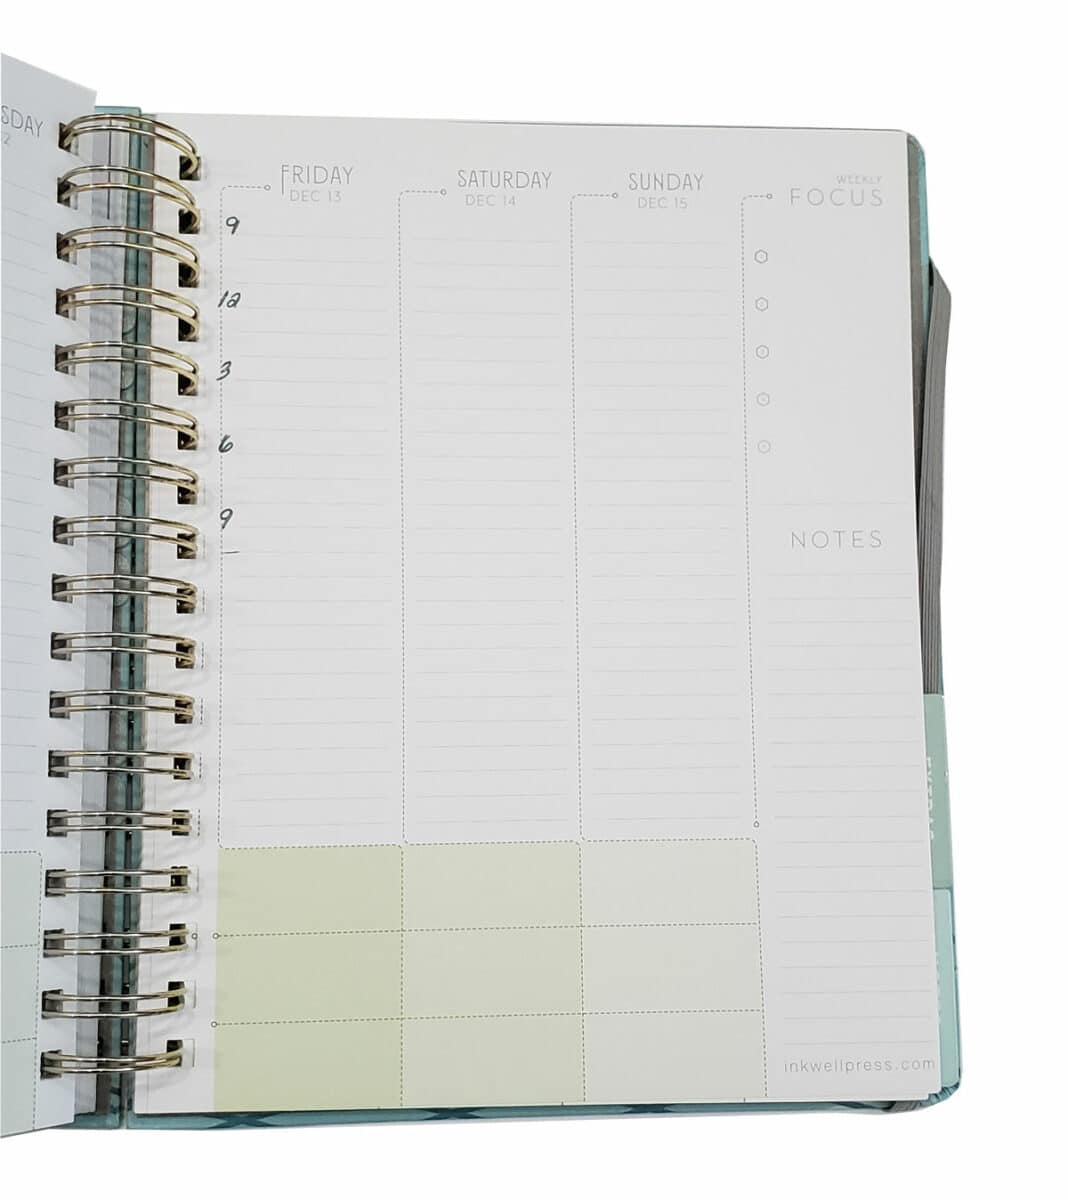 A spiral bound Inkwell Press Planner sits open to a weekend calendar page. The page is blank.